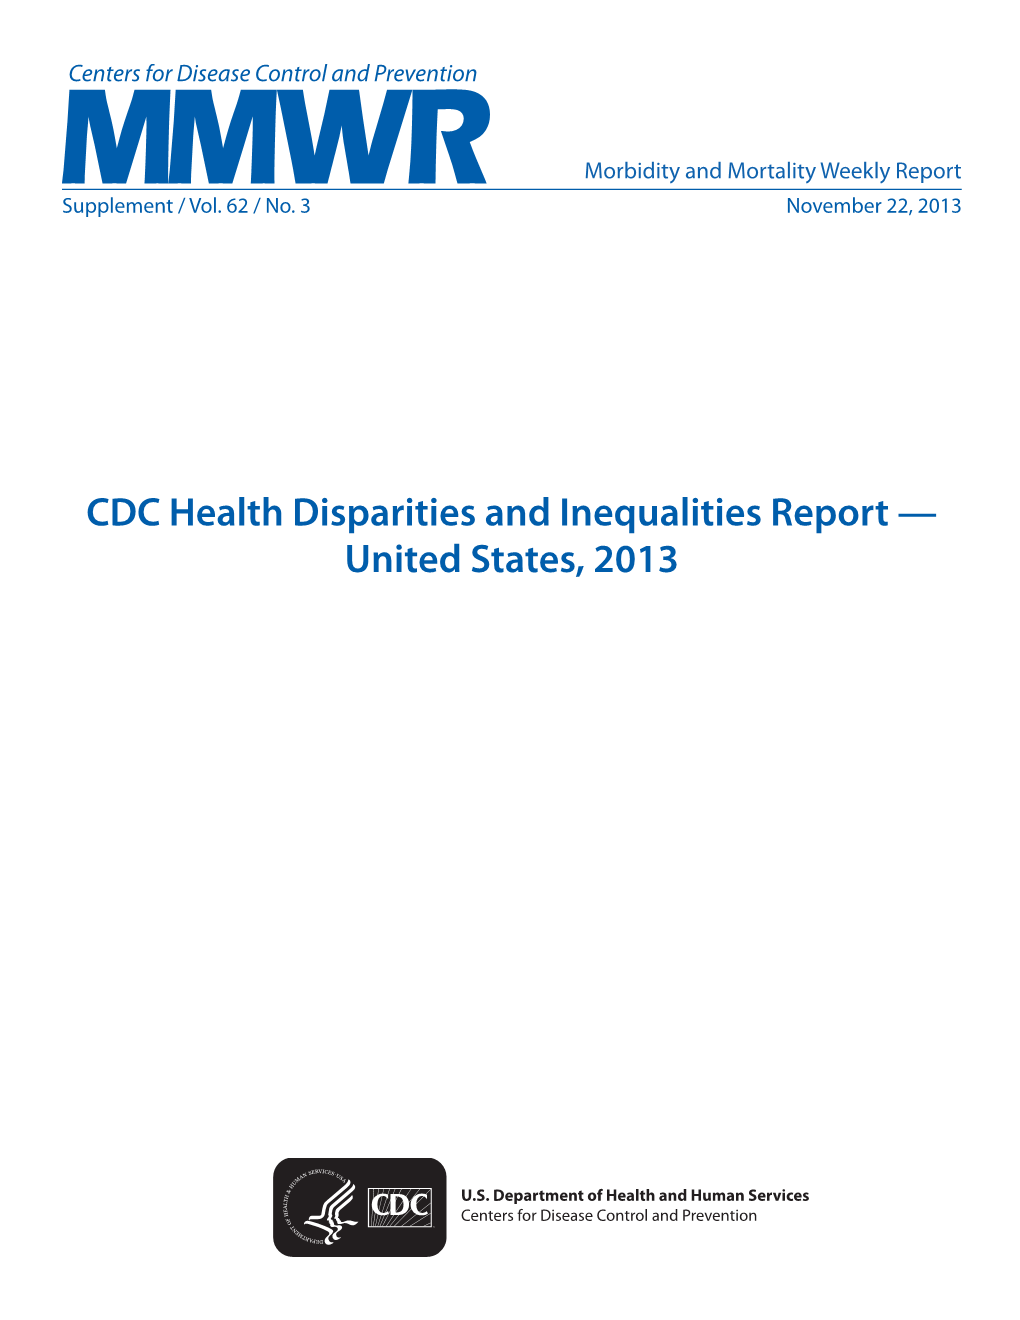 CDC Health Disparities and Inequalities Report — United States, 2013